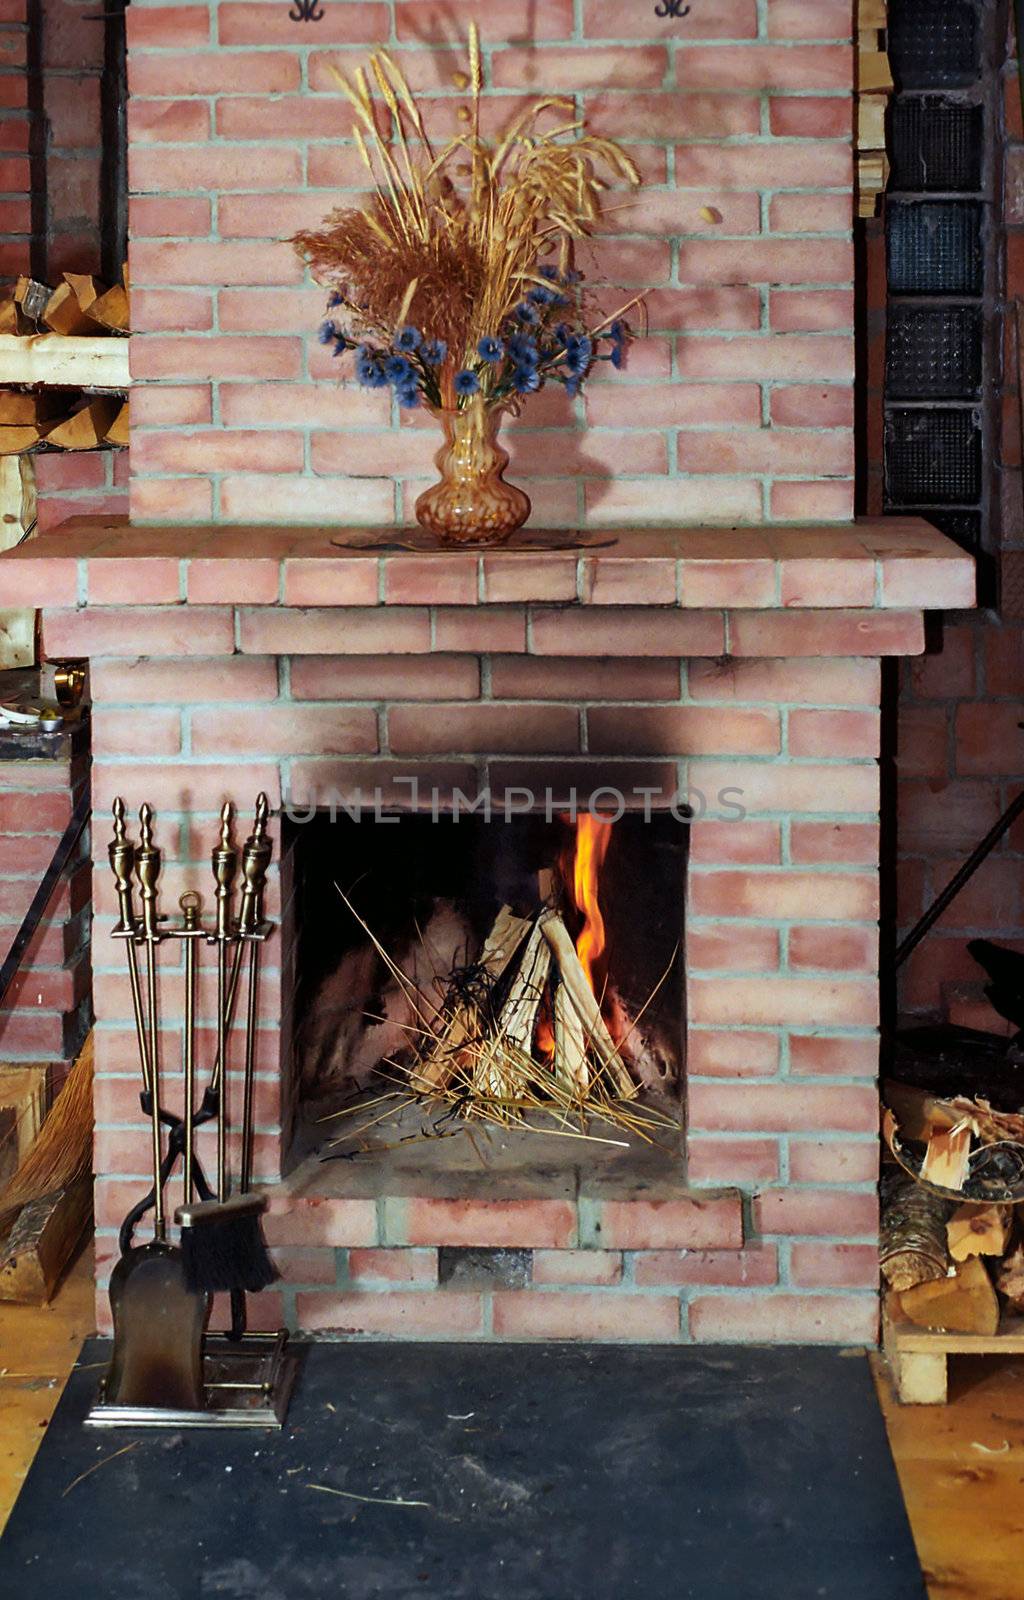 Village fireplace with fire irons and dead flowers on mantelshelf